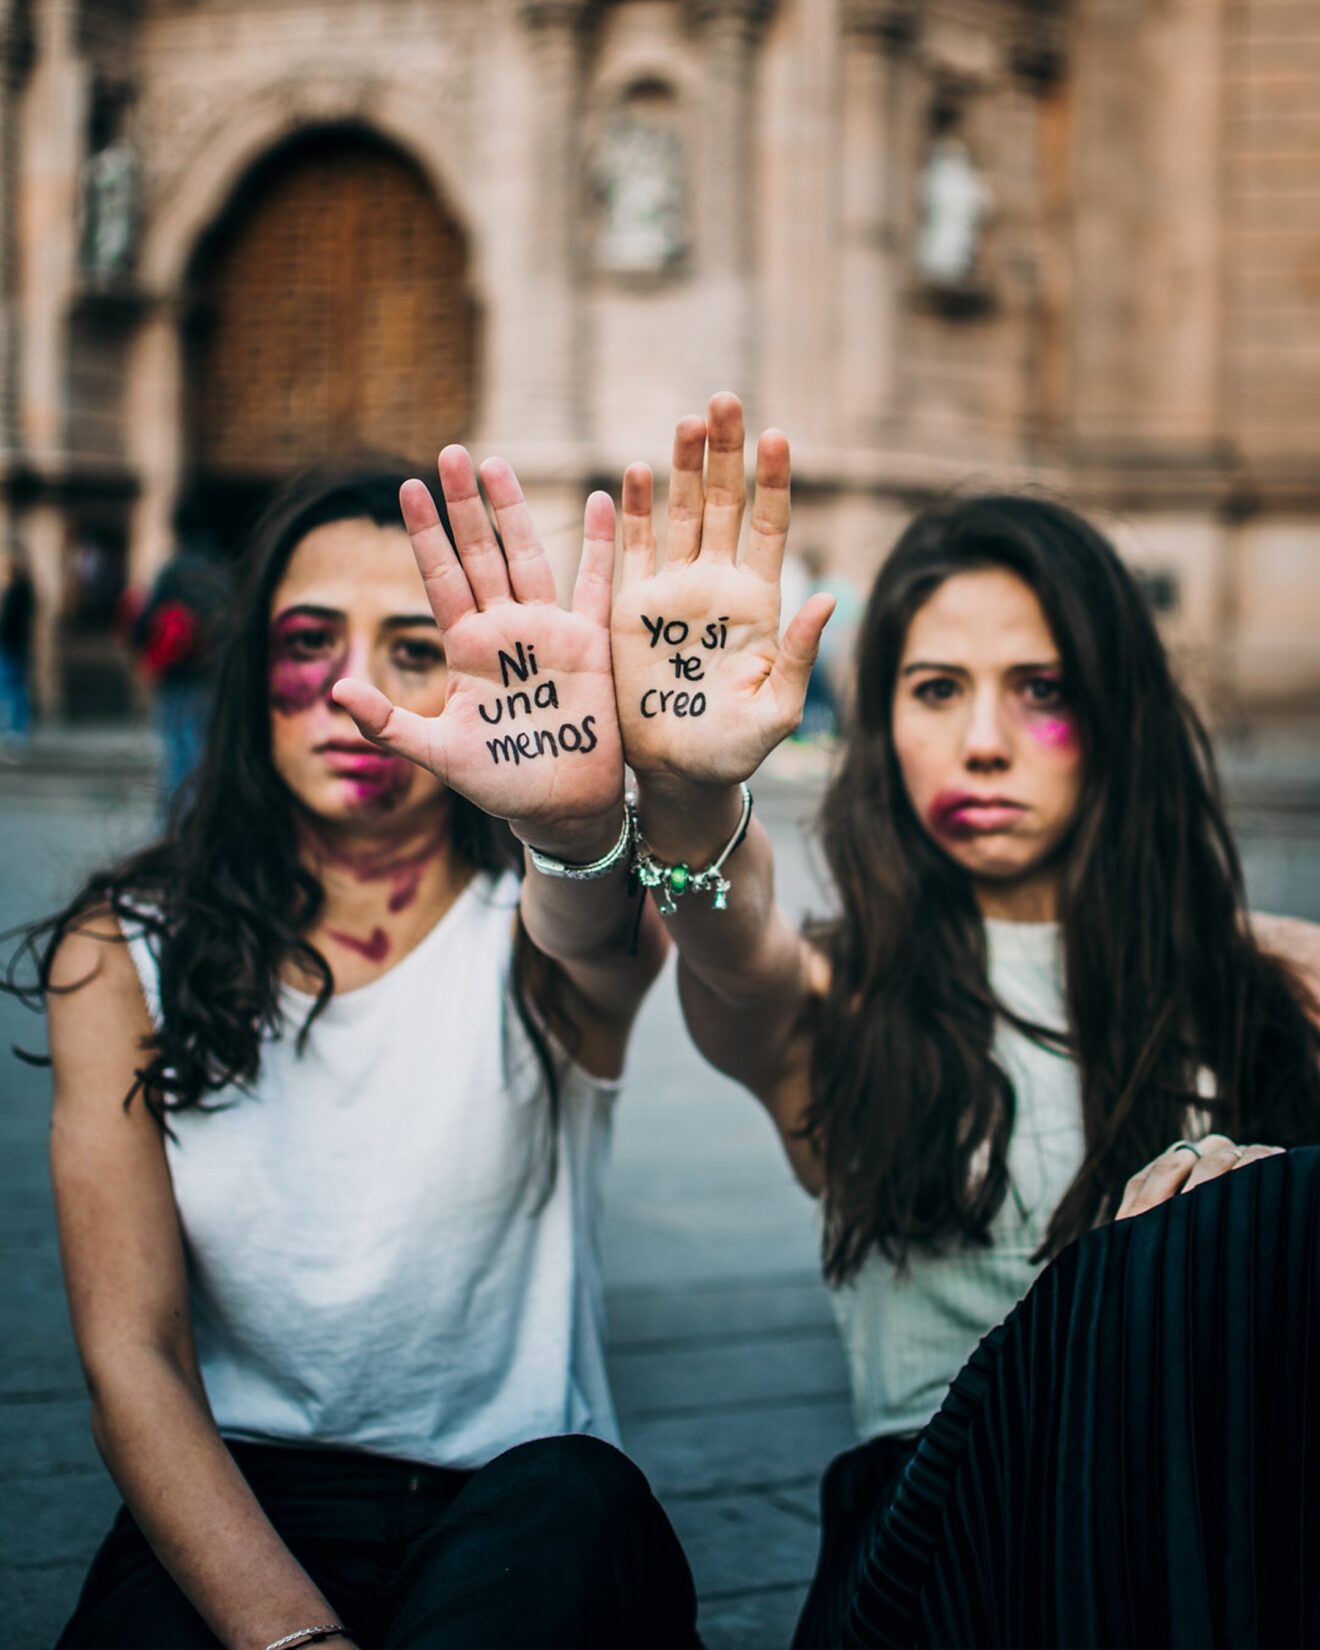 Two women sit on the ground, each with one hand up, palm facing the camera.  On their palms there is writing that says "Ni una menos" and "Yo si te creo".  They both also have makeup on their face made to look like bruises on their mouths and eyes.